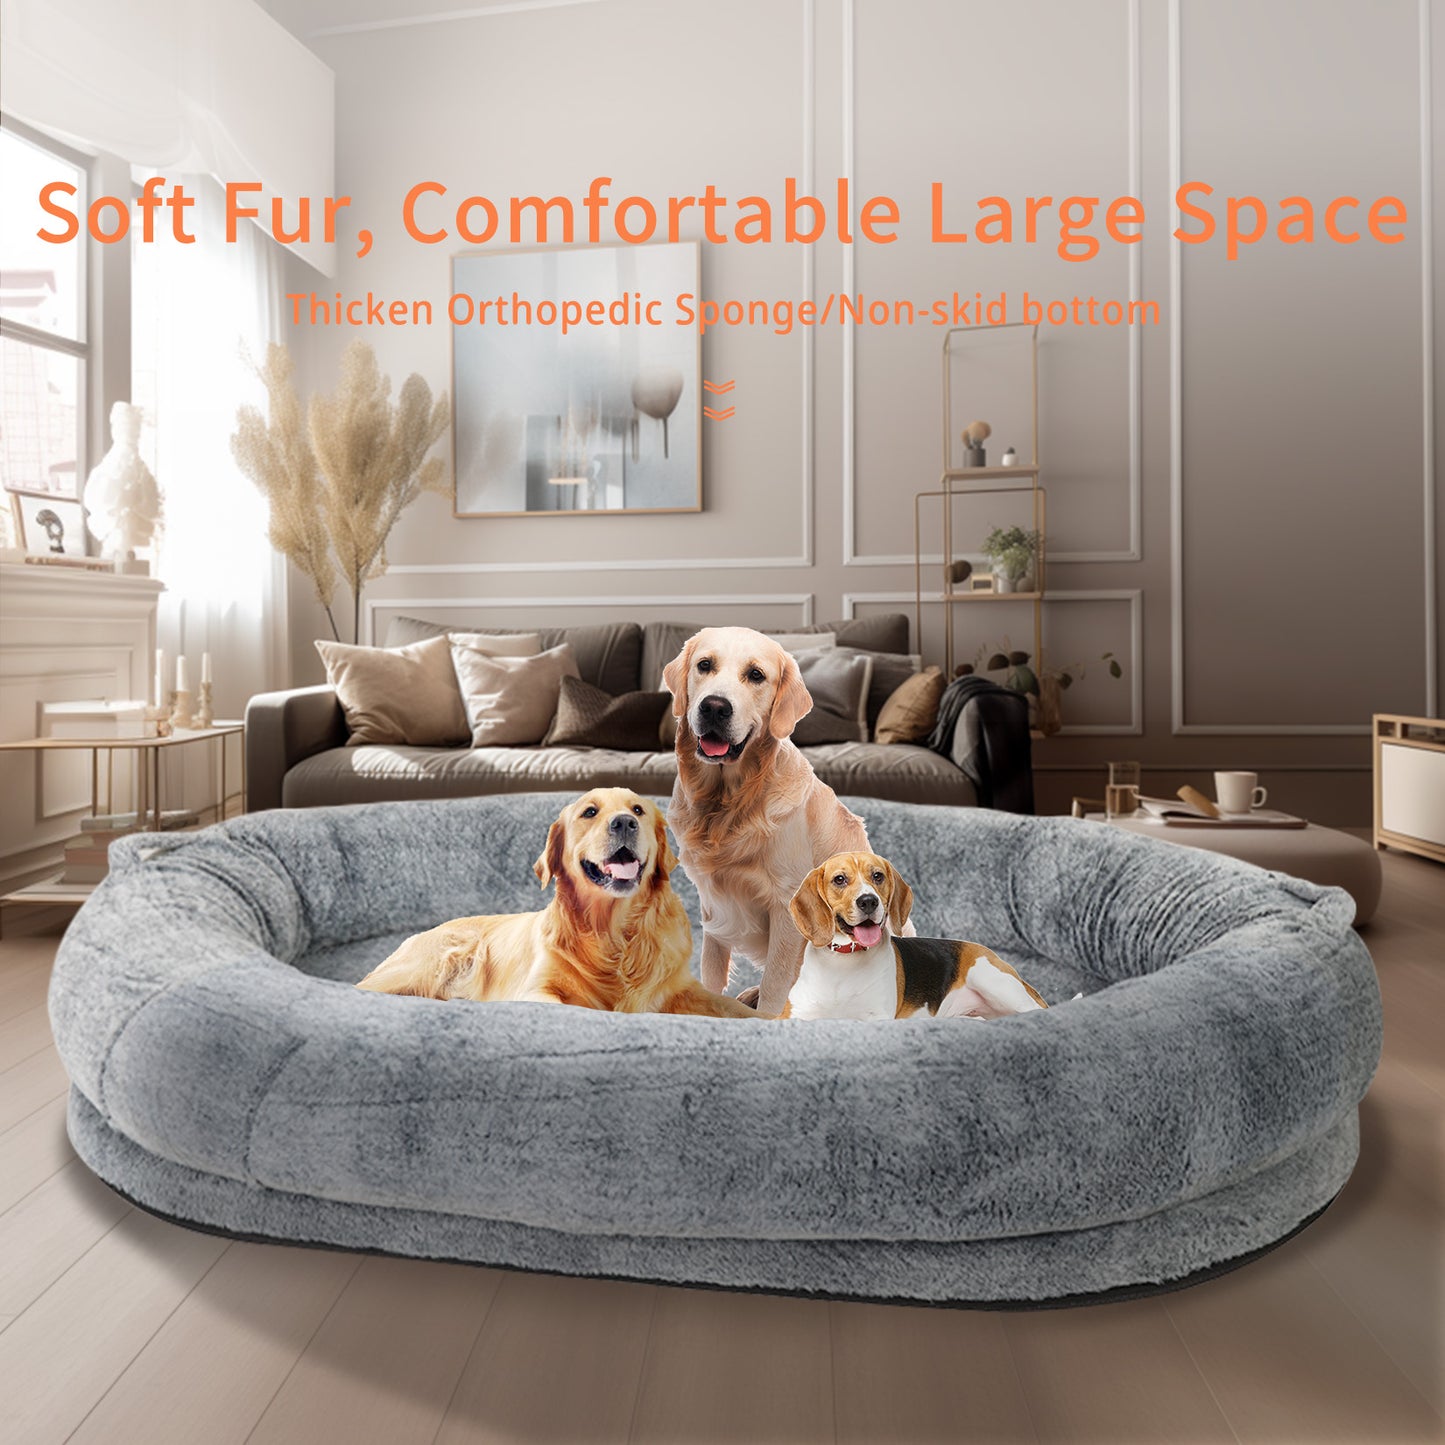 Giant Oval Dog Bed Extra Large Dog Bed for You and Pets Warm Sleeping Bed Grey